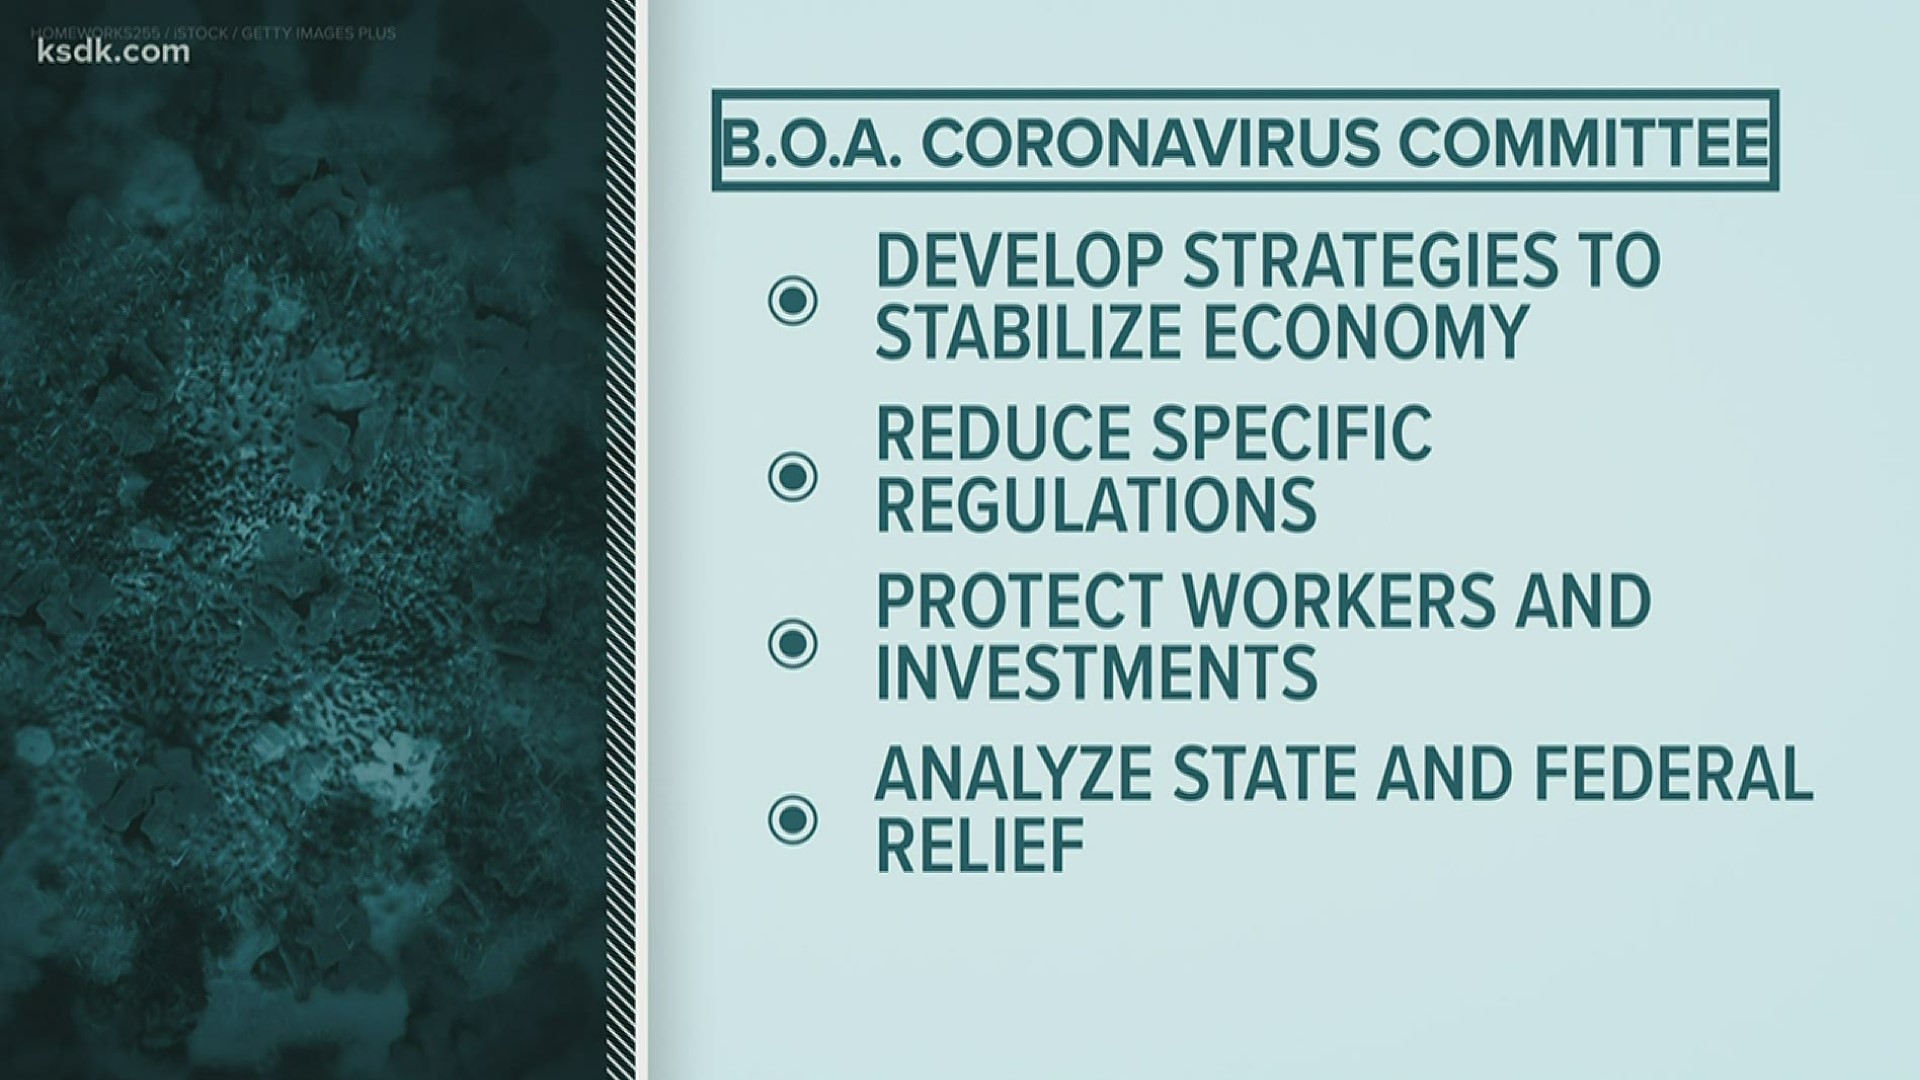 The Board of Aldermen will introduce a resolution Tuesday to create a coronavirus special committee to address economic relief in St. Louis.